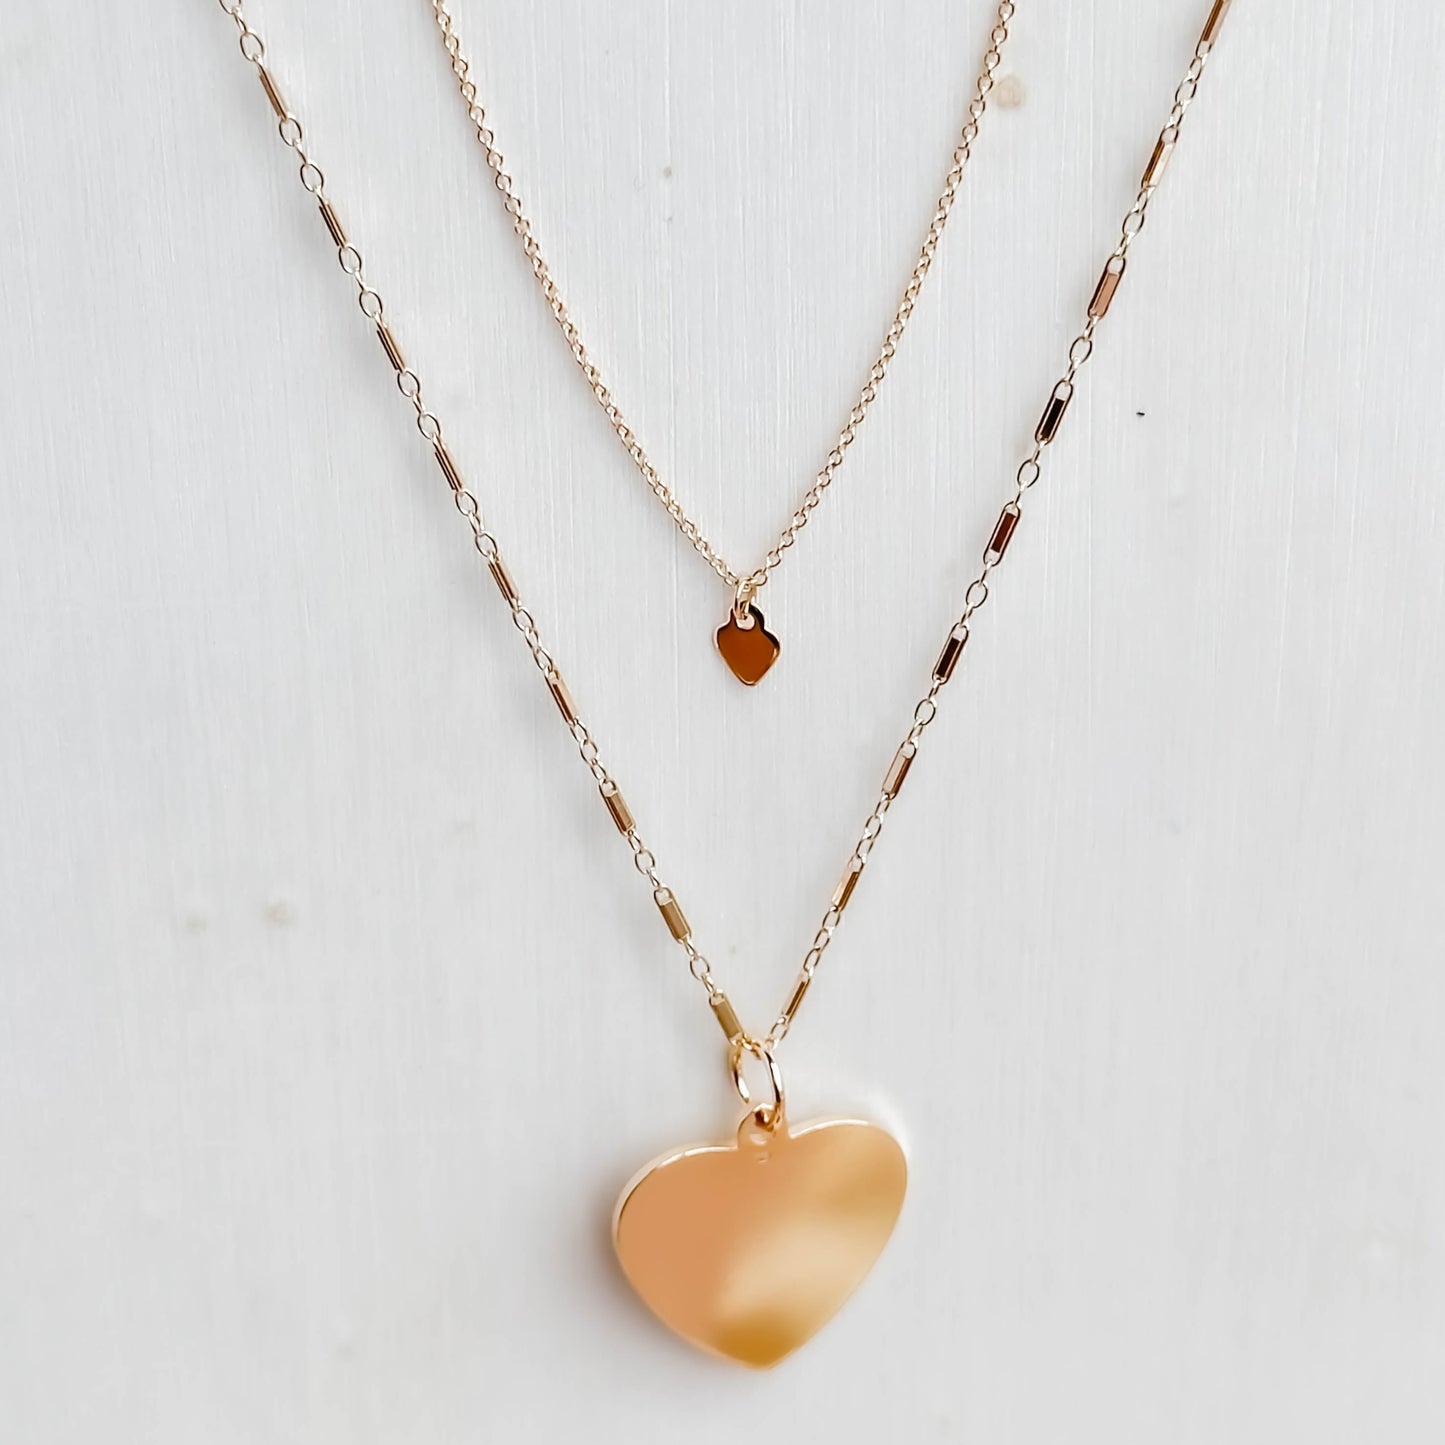 Baby Love Heart Necklace